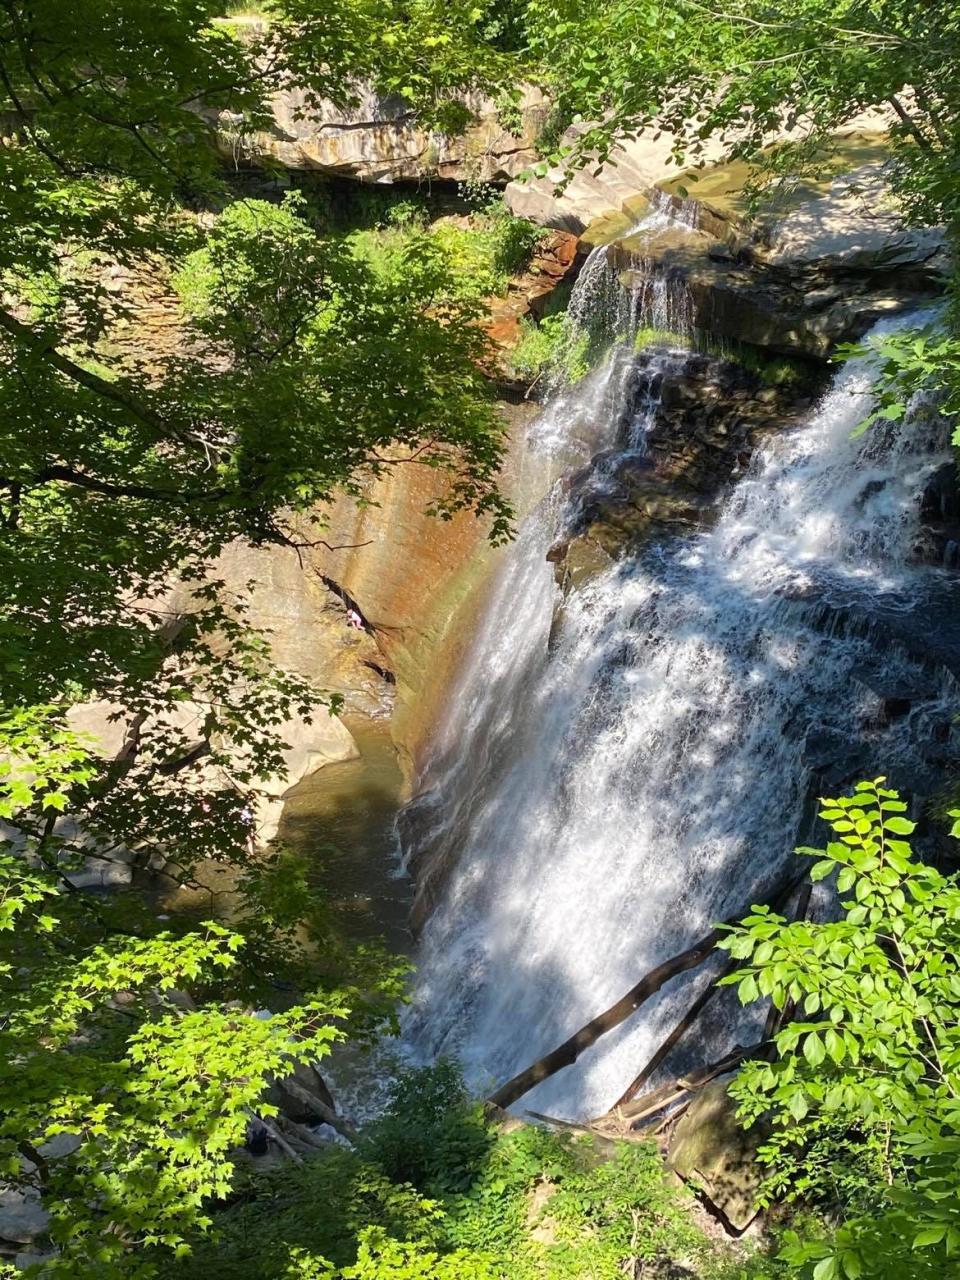 Brandywine Falls is the premiere attraction at Cuyahoga Valley National Park. Other features include lakes, hiking and biking trails, a covered bridge and visitor's center.